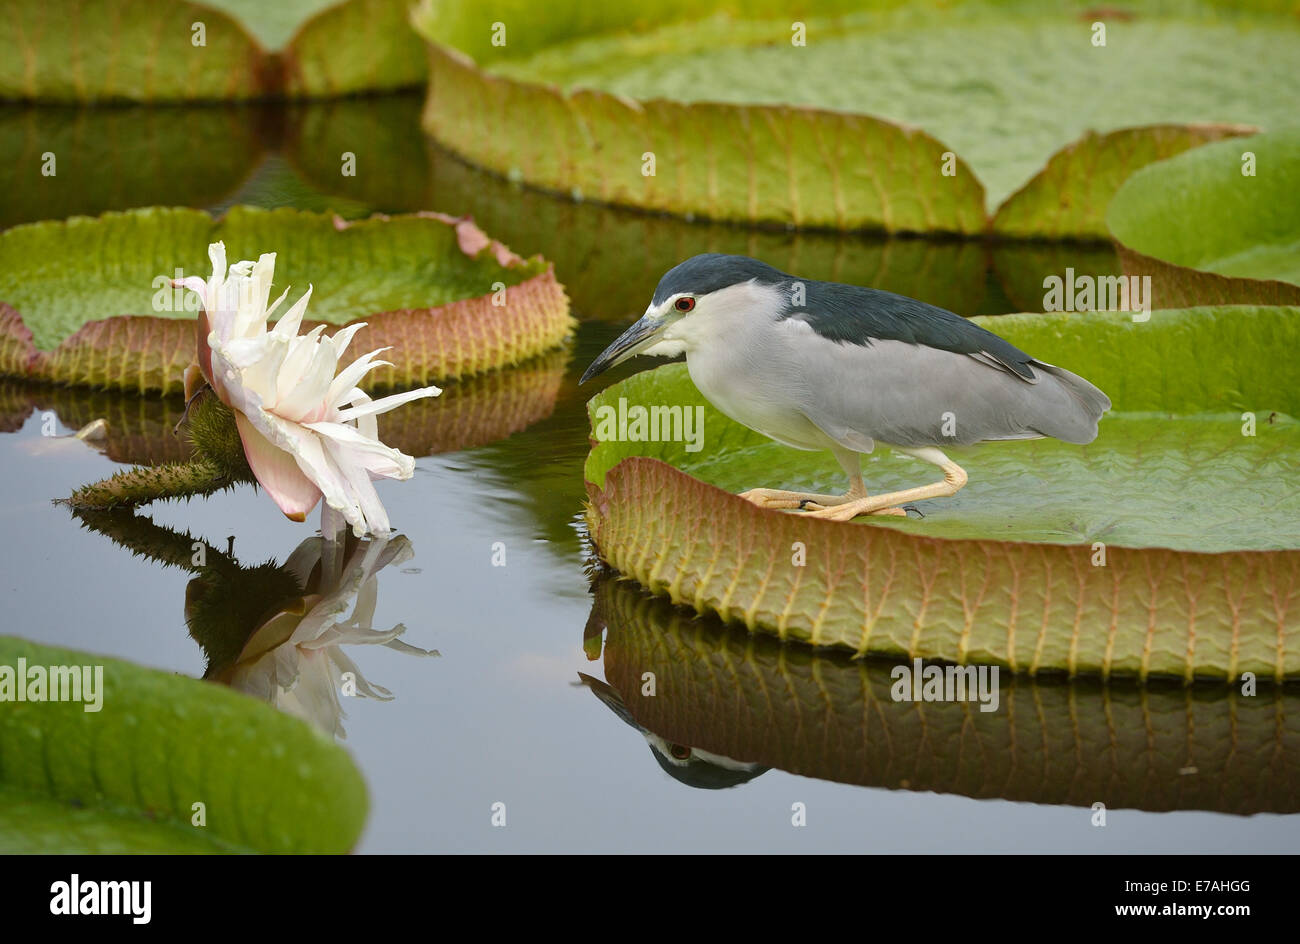 Taipei's Taiwan. 11th Sep, 2014. A night heron rests on a giant leaf of a Victoria during an aquatic plants exhibition at the Shuangxi Park in Taipei, southeast China's Taiwan, Sept. 11, 2014. Victoria is a genus of water-lilies, in the plant family Nymphaeaceae, with very large green leaves that lie flat on the water's surface. The leaf of Victoria is able to support quite a large weight due to the plant's structure, although the leaf itself is quite delicate. Credit:  Wang Qingqin/Xinhua/Alamy Live News Stock Photo